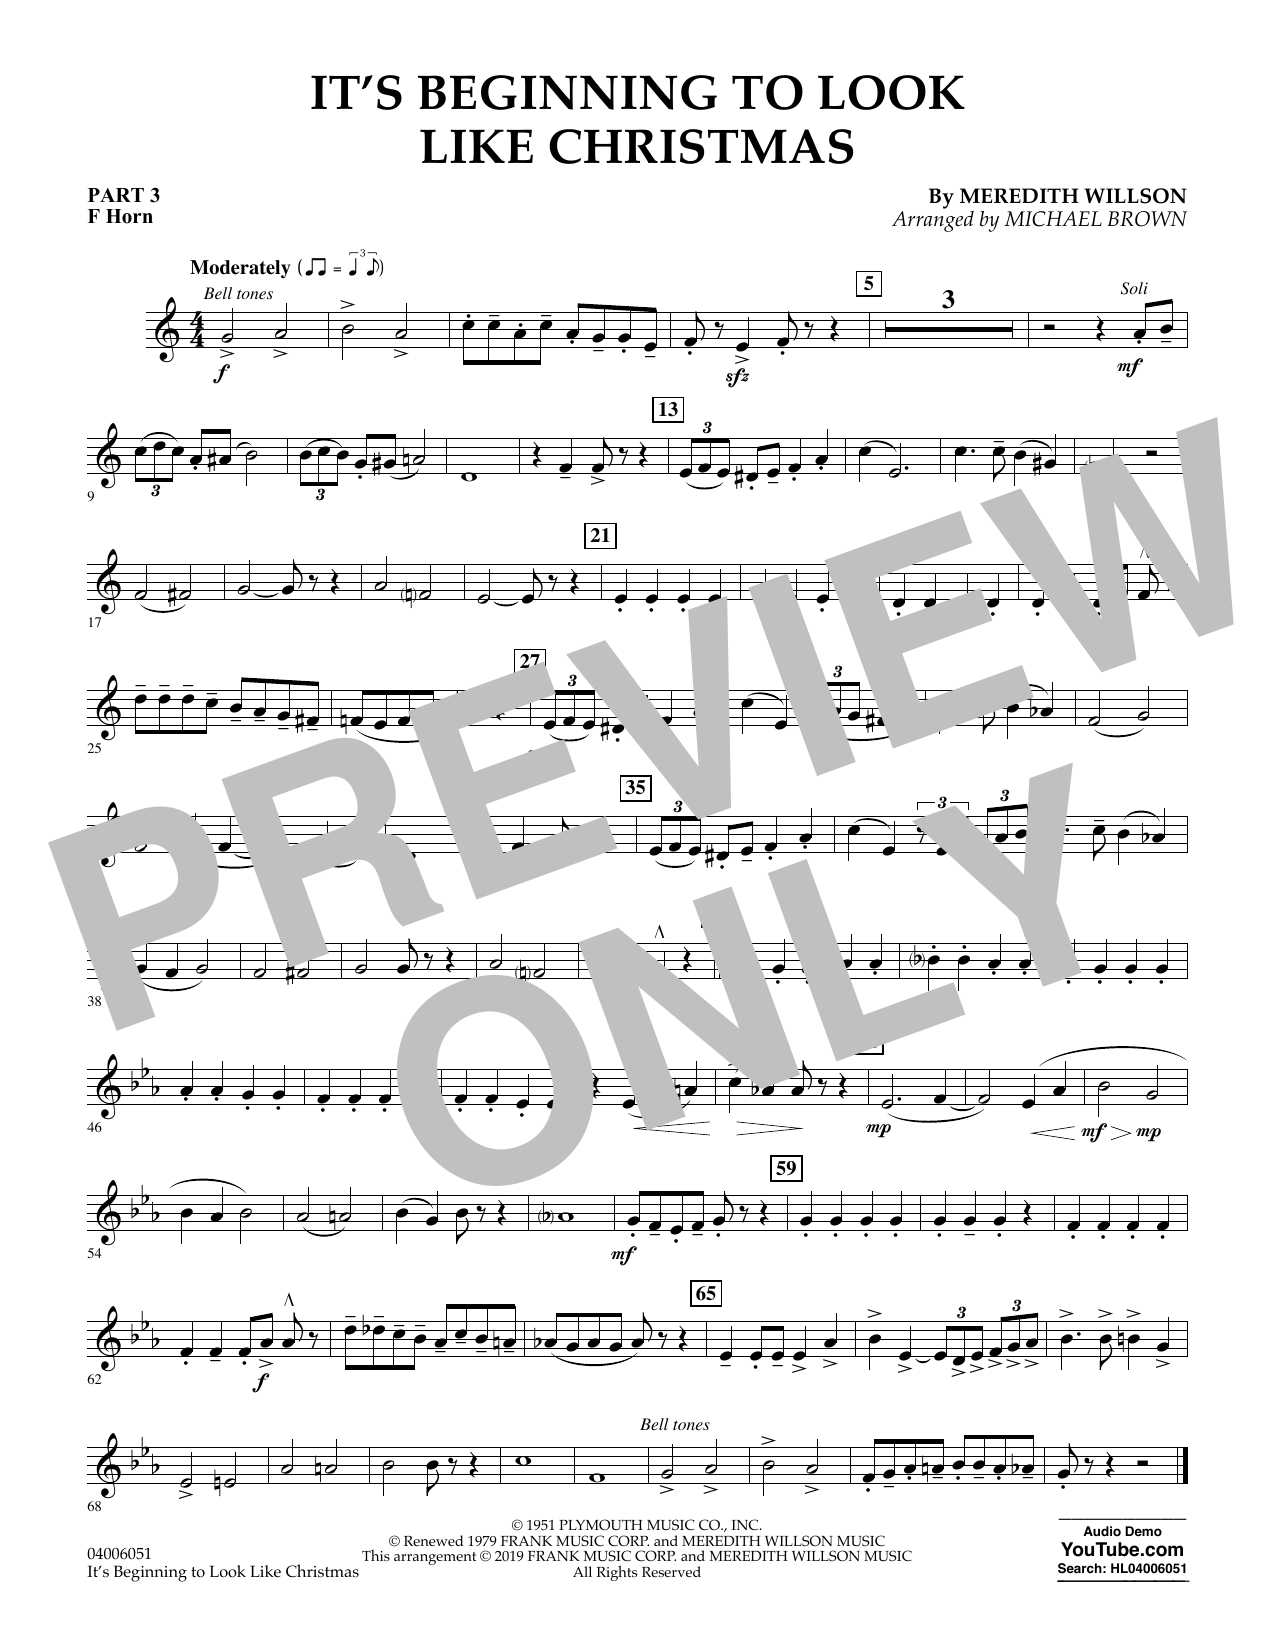 Meredith Willson It's Beginning to Look Like Christmas (arr. Michael Brown) - Pt.3 - F Horn sheet music preview music notes and score for Concert Band including 1 page(s)